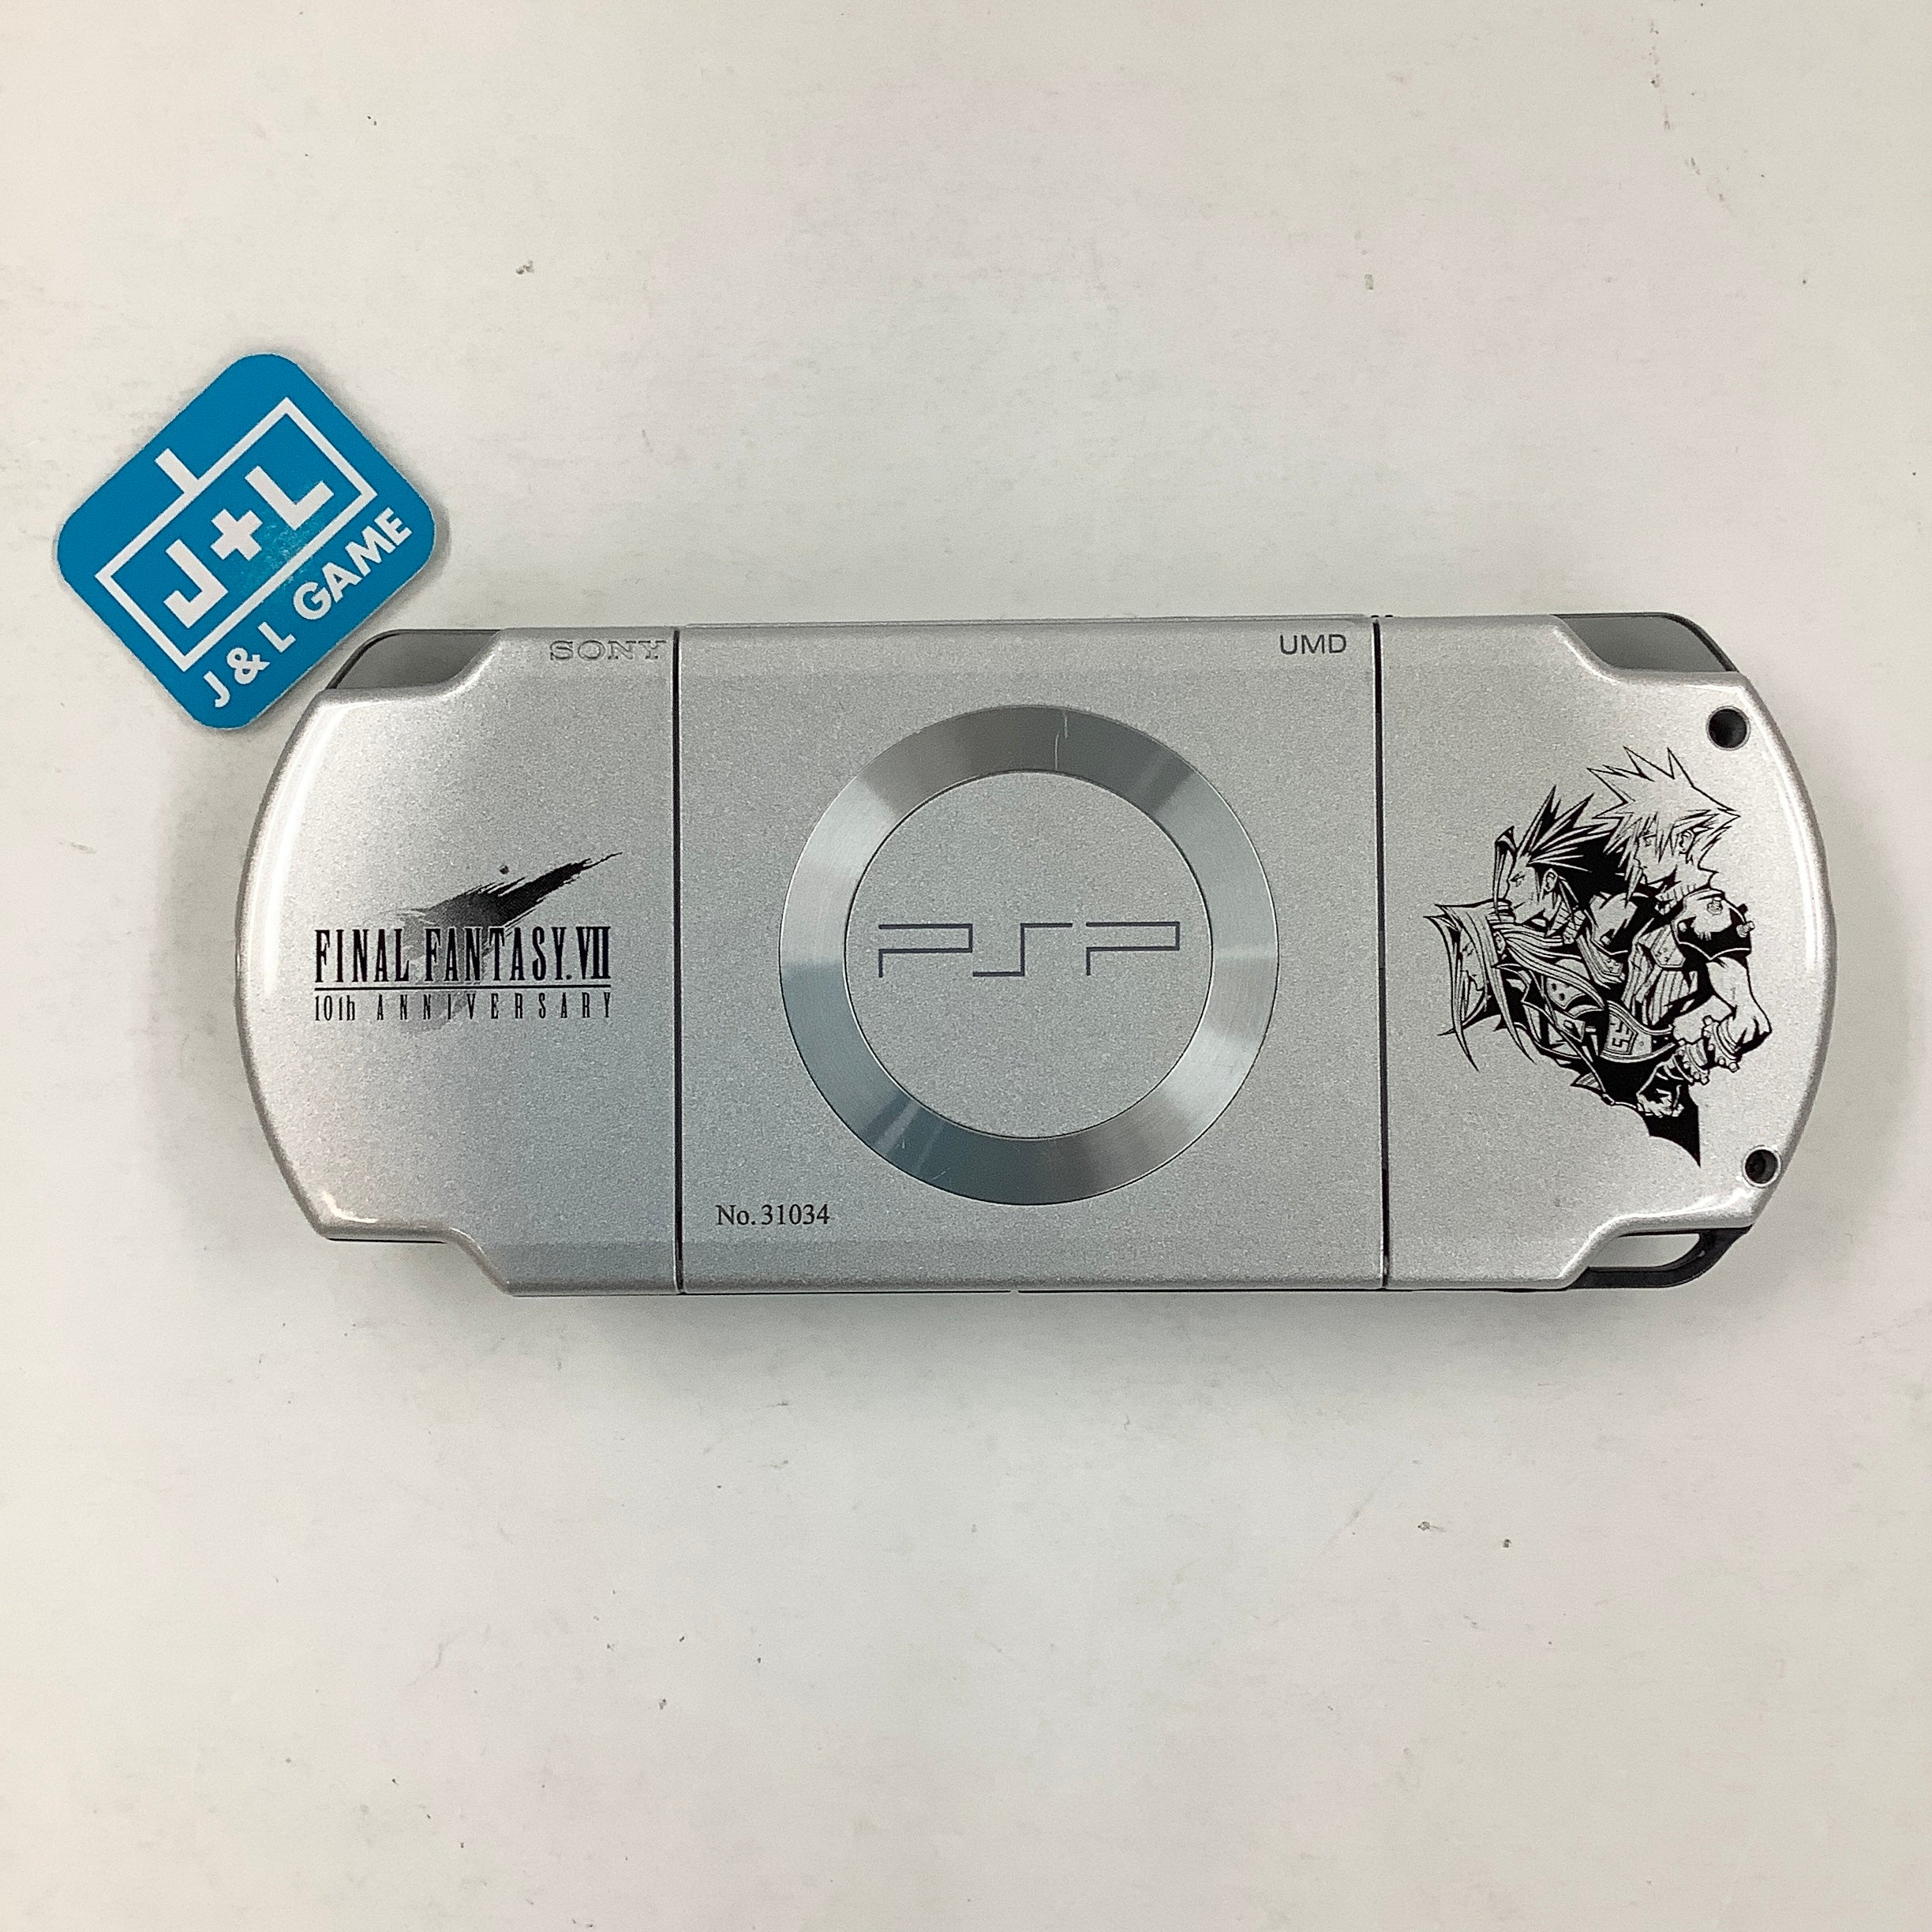 Crisis Core Final Fantasy VII - (FFVII 10th Anniversary Limited) PSP 2000 Bundle - (PSP) Sony PSP [Pre-Owned] (Japanese Import) Consoles Square Enix   